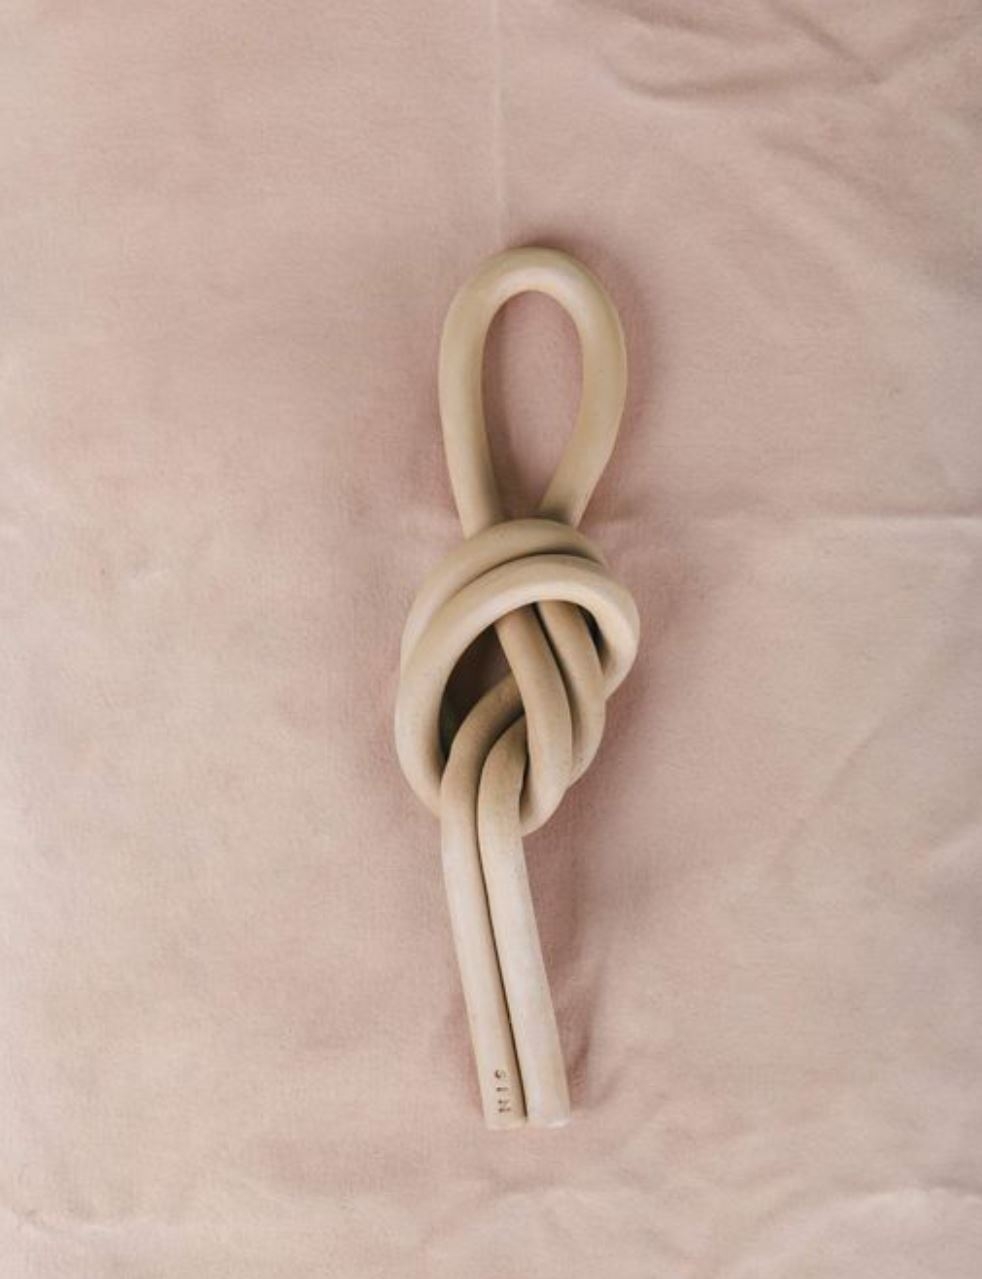 Overhand Knot by SIN Ceramics - Image 2